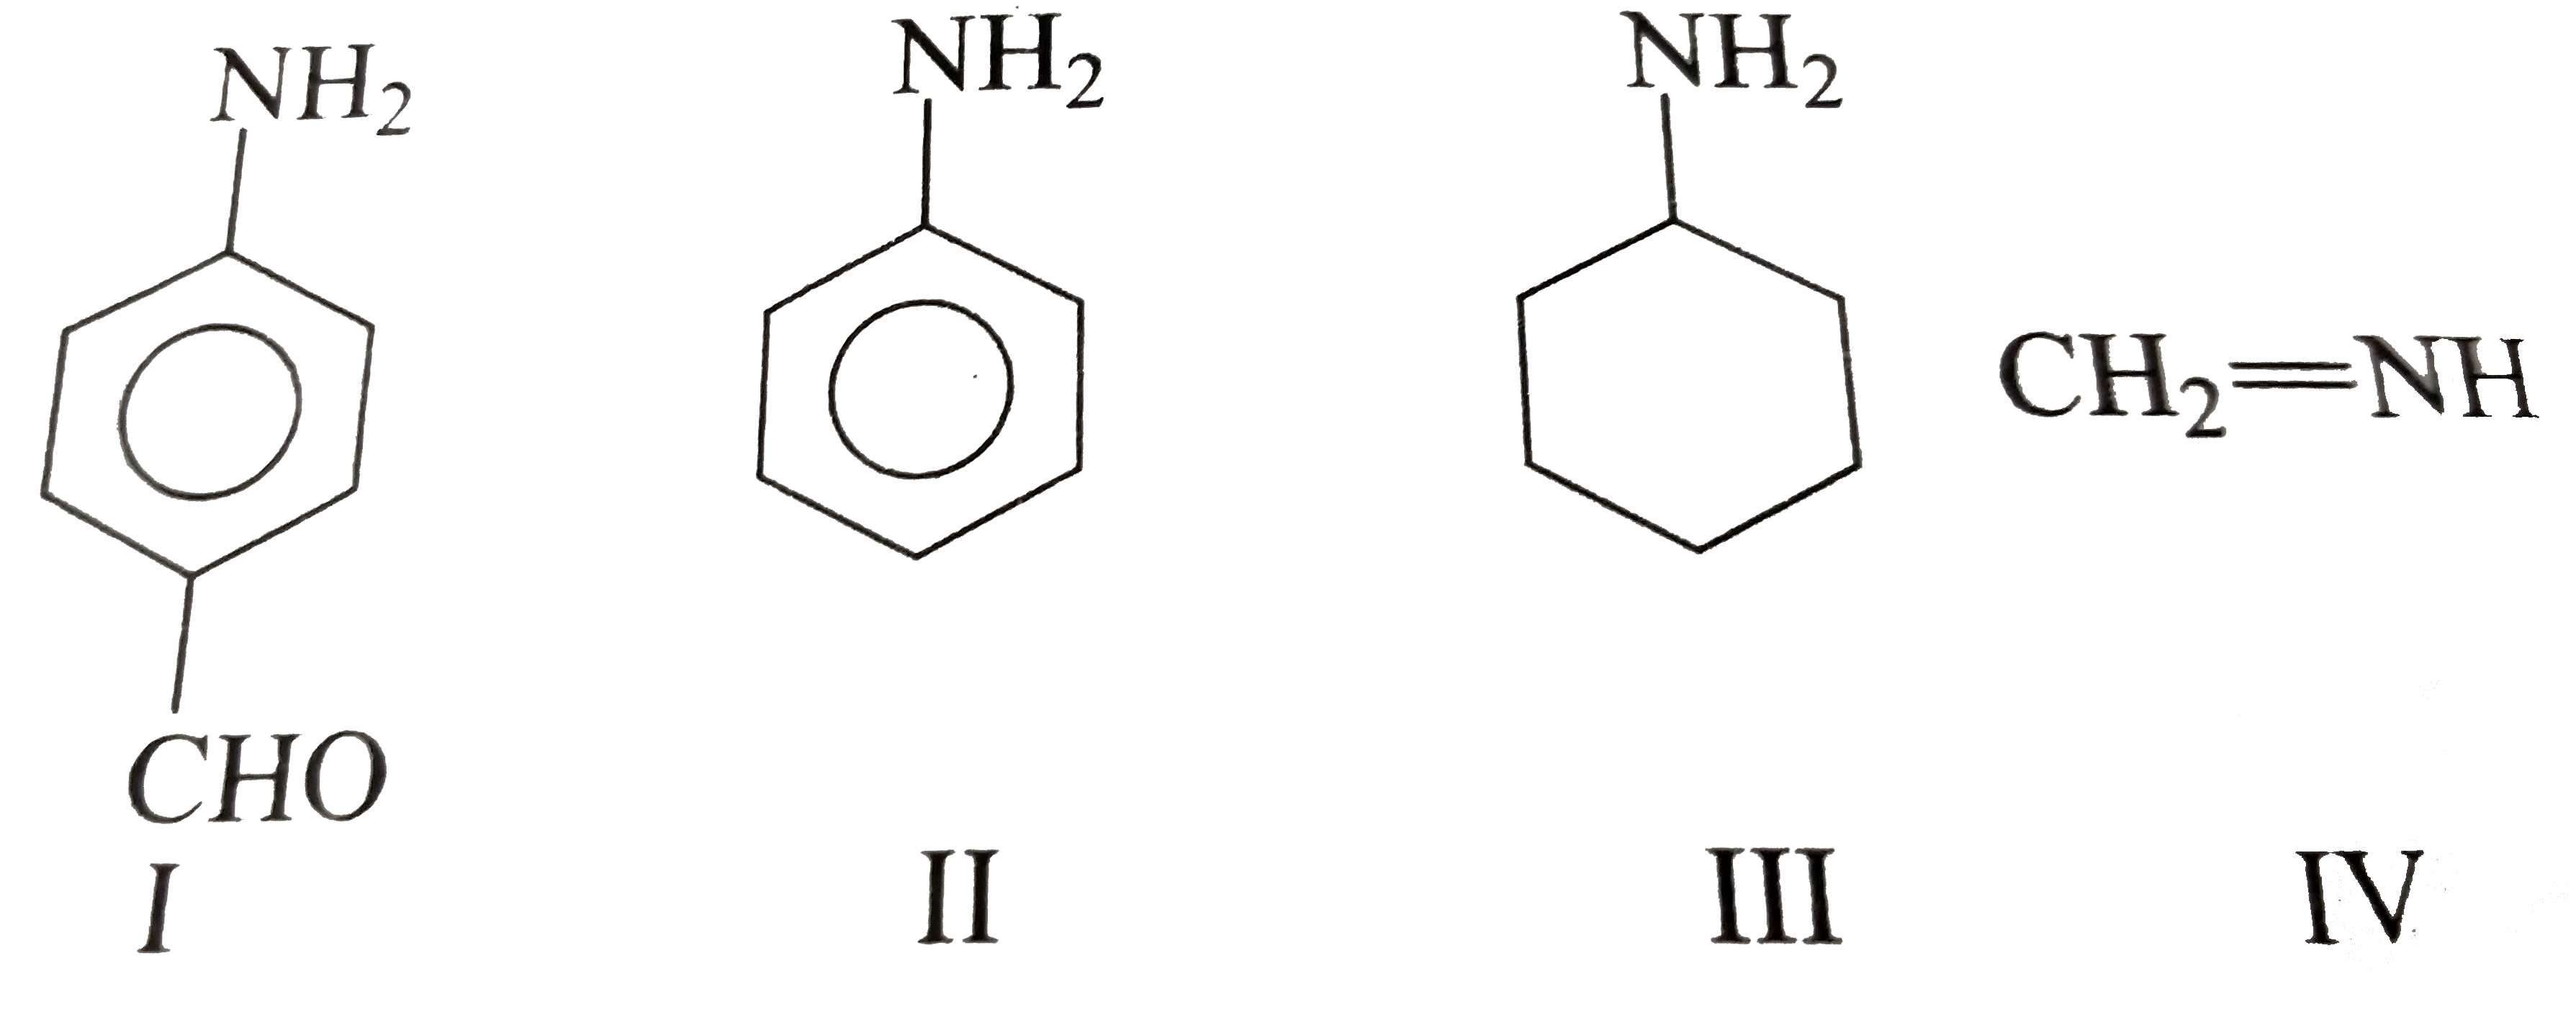 Among these compounds the correct order of  C-N bond length is :